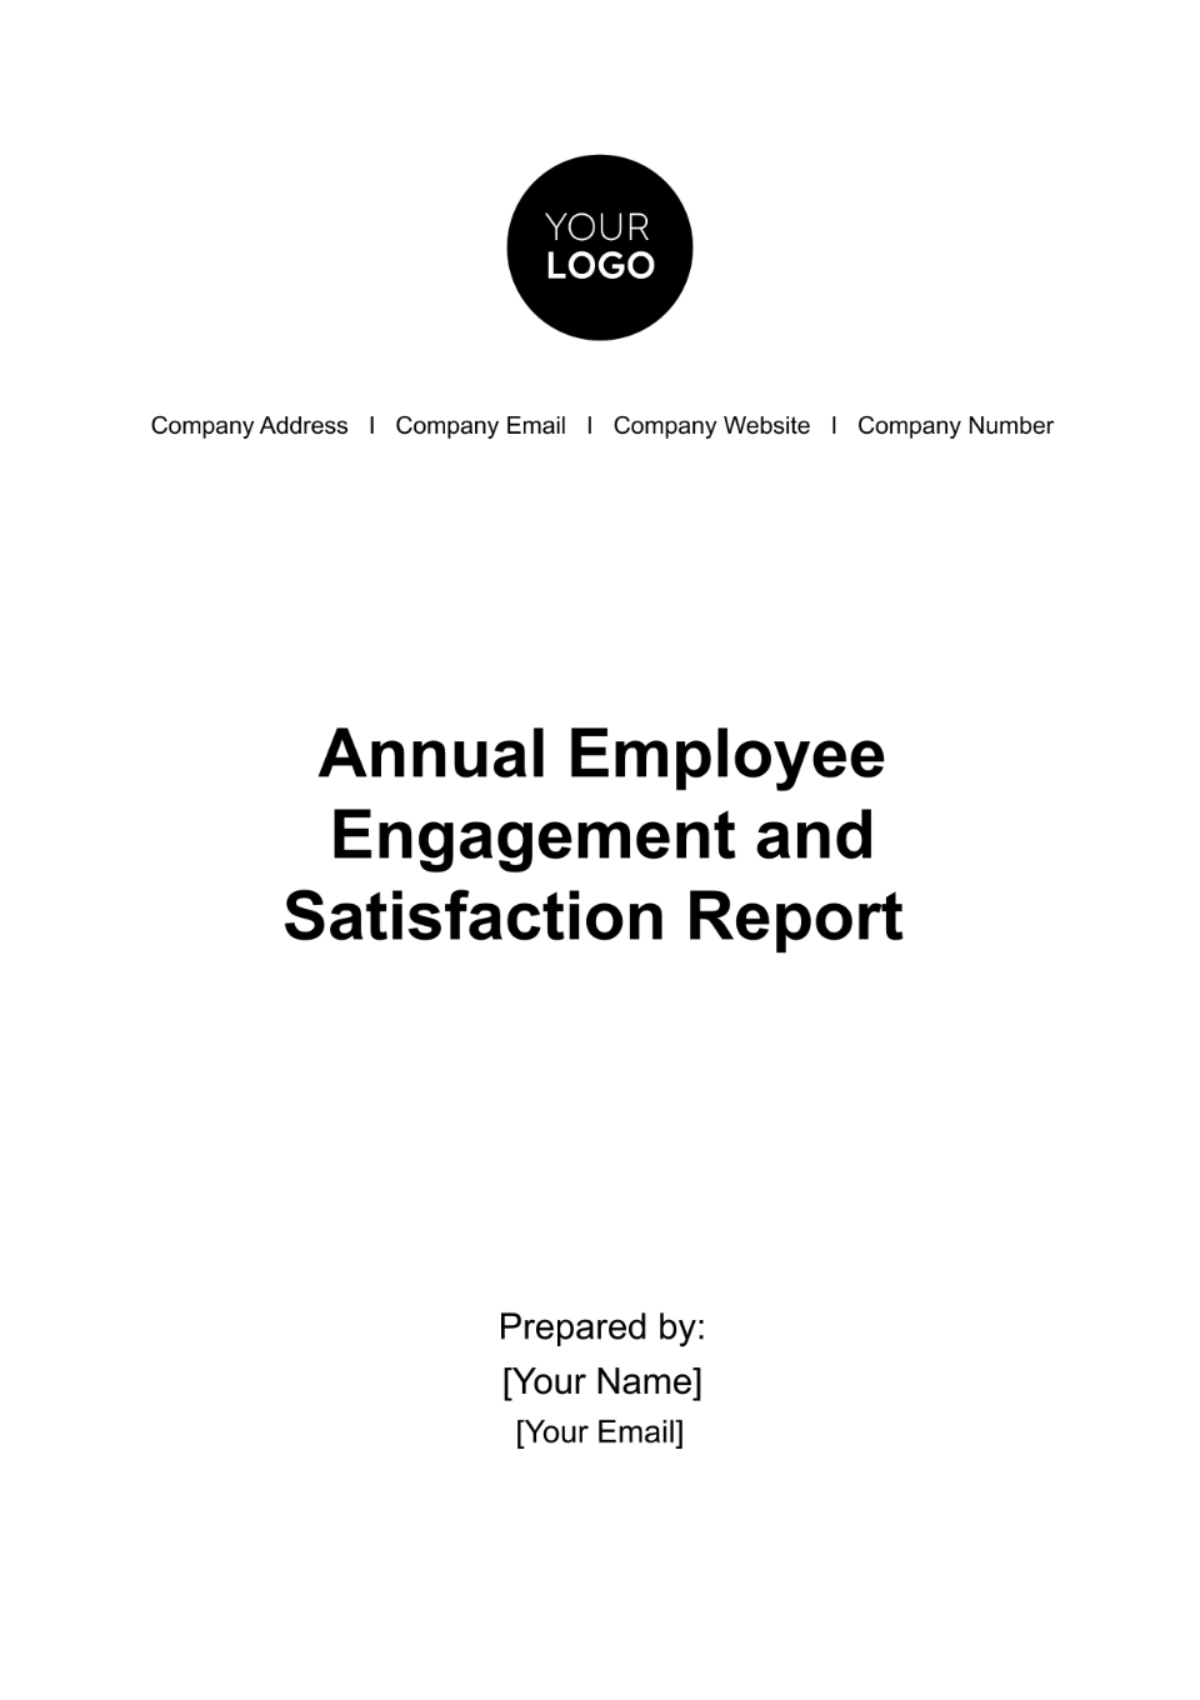 Free Annual Employee Engagement and Satisfaction Report HR Template